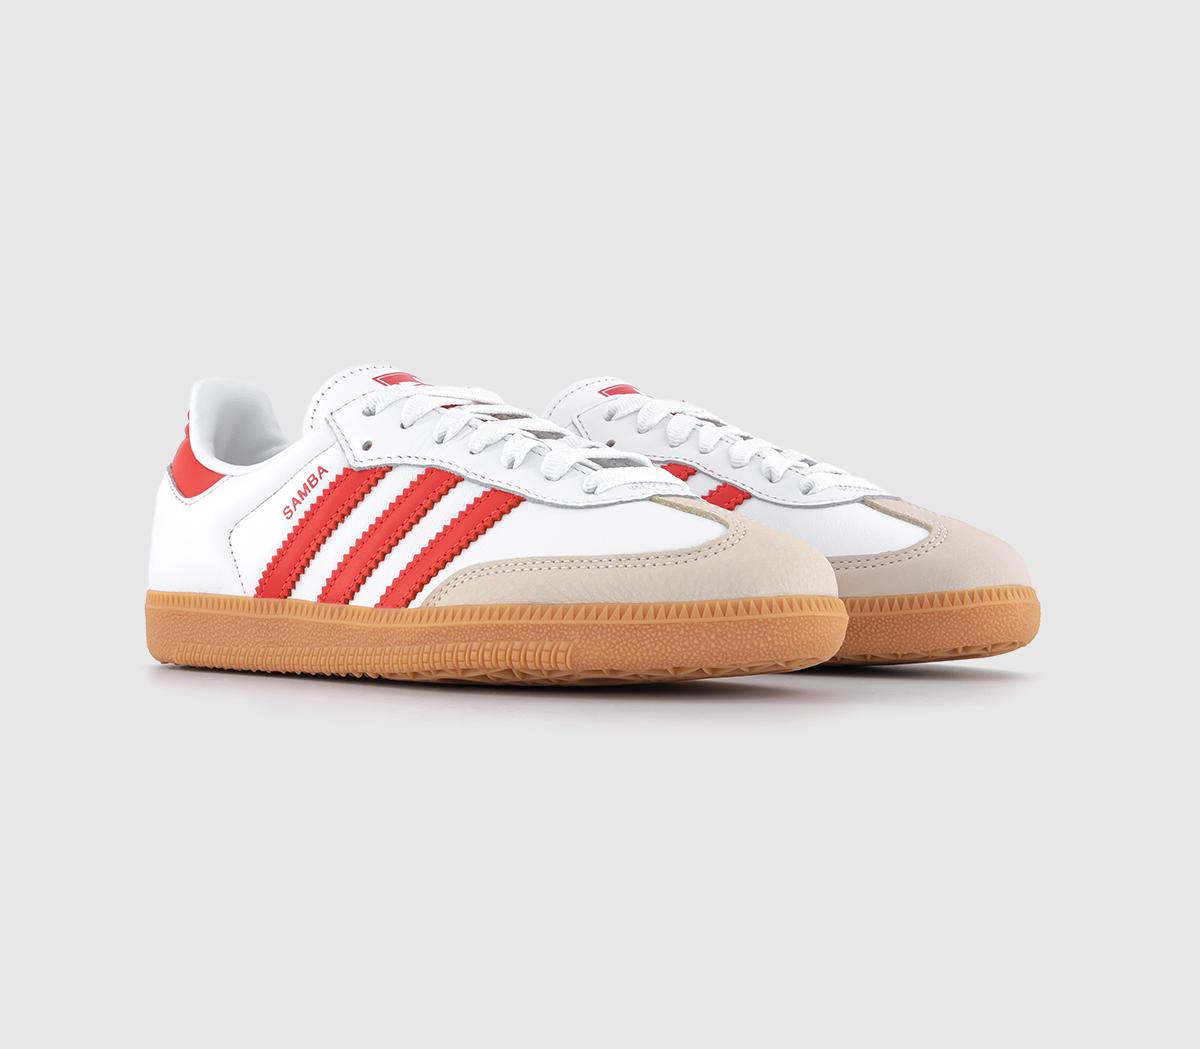 adidas Samba OG Trainers White Solar Red Offwhite - Women's Trainers